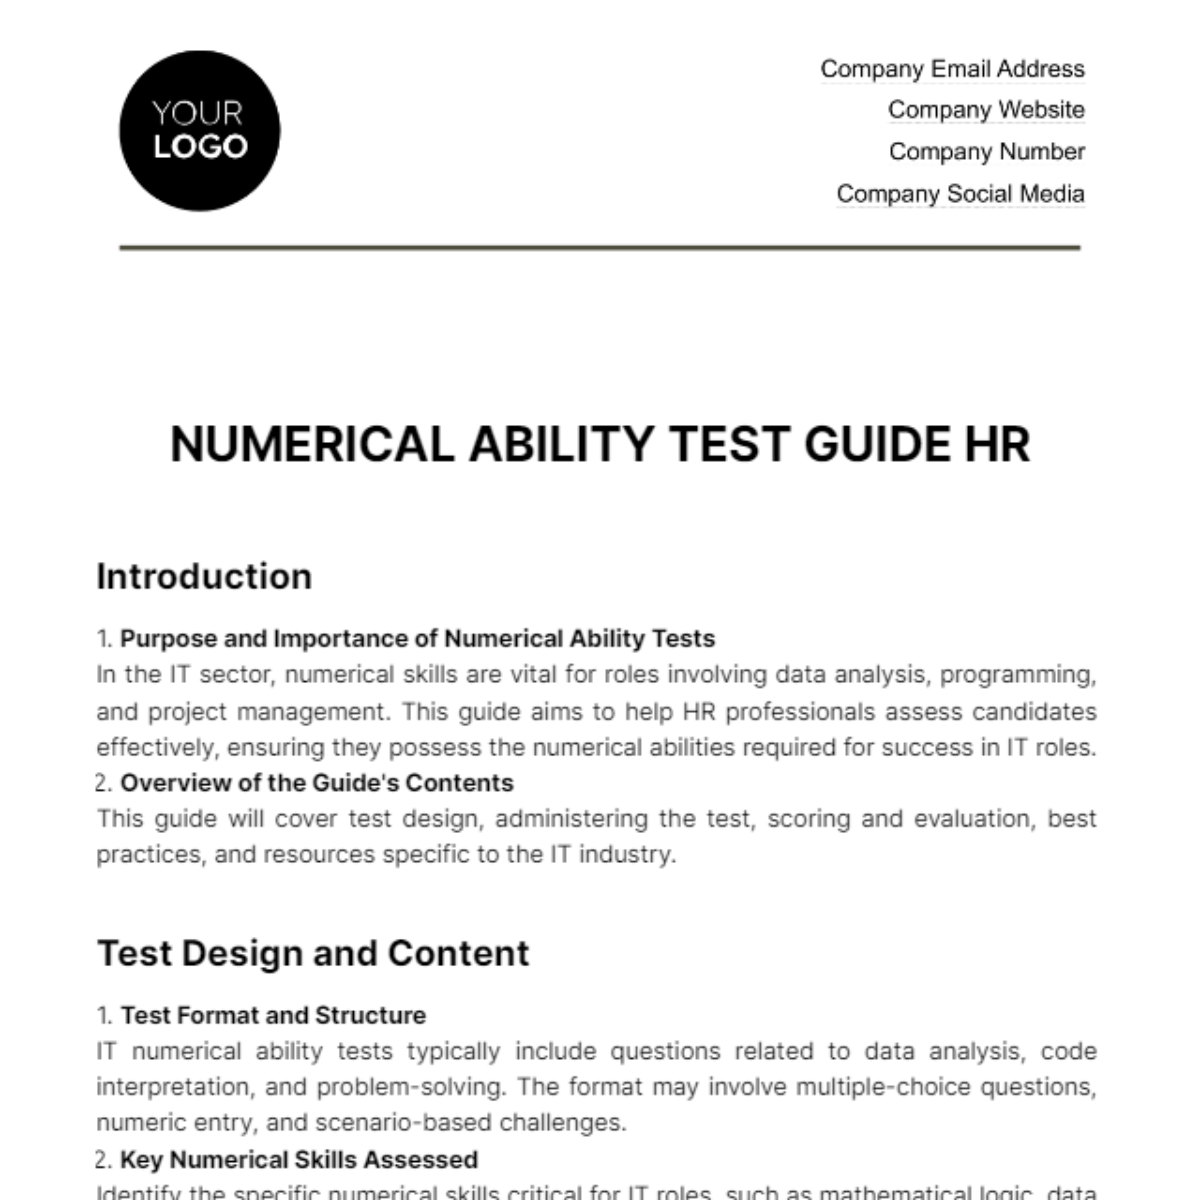 Numerical Ability Test Guide HR Template